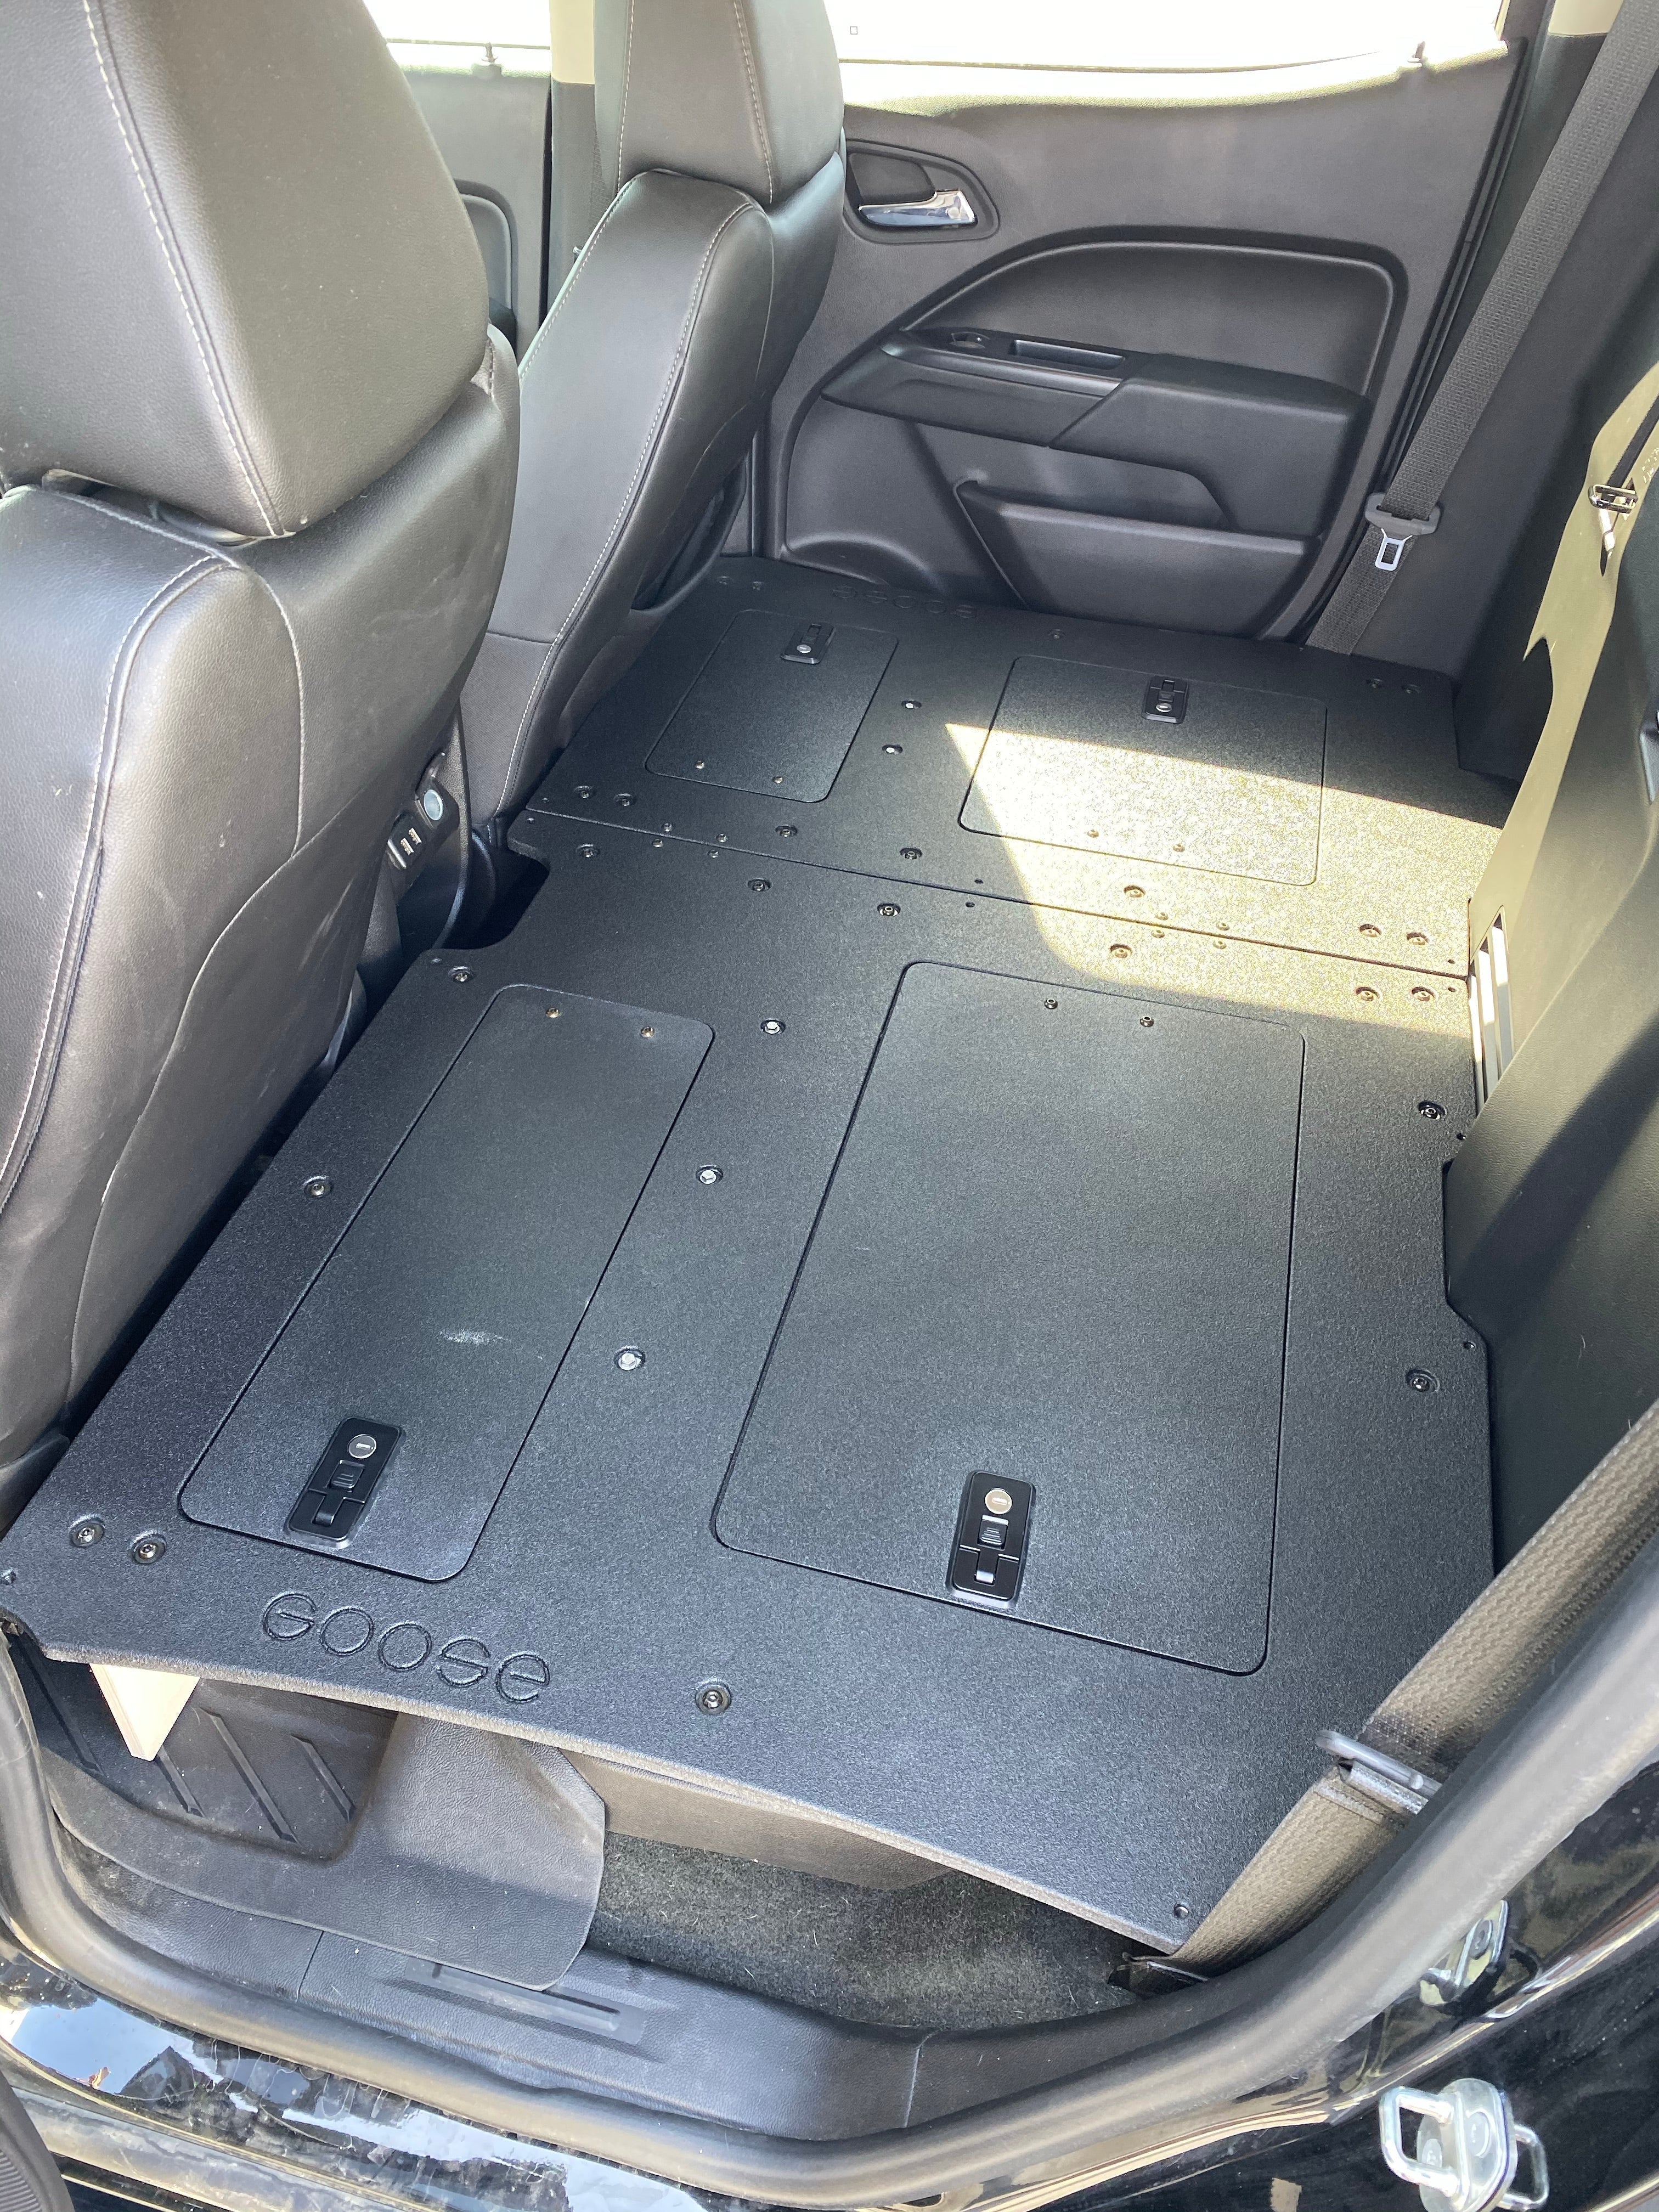 Chevy Colorado 2015-Present 2nd Gen. Crew Cab - Second Row Seat Delete Plate System